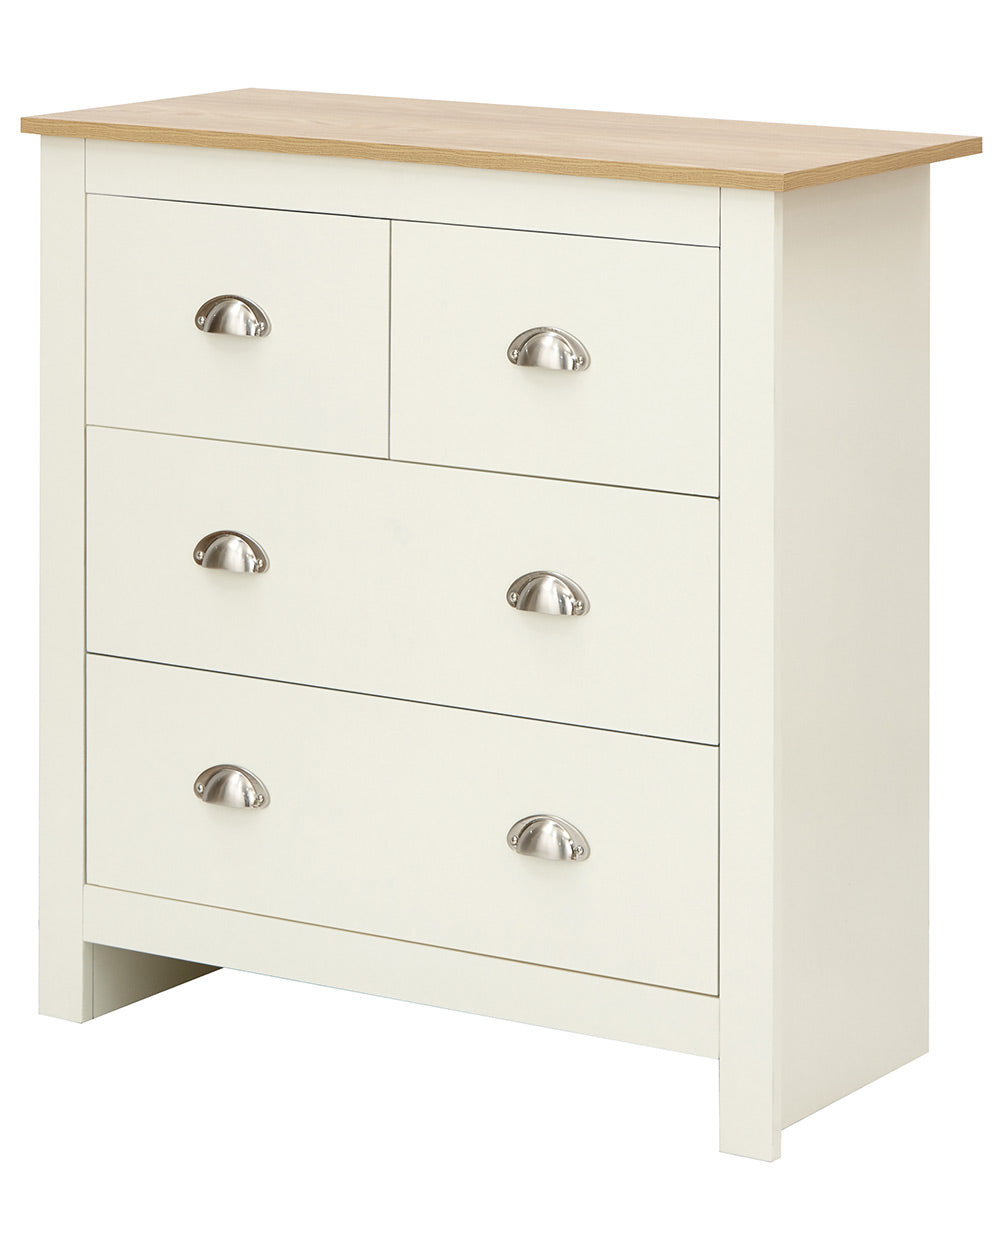 Lancaster 2 + 2 chest of drawers in cream with an oak effect top  on a white cut out background